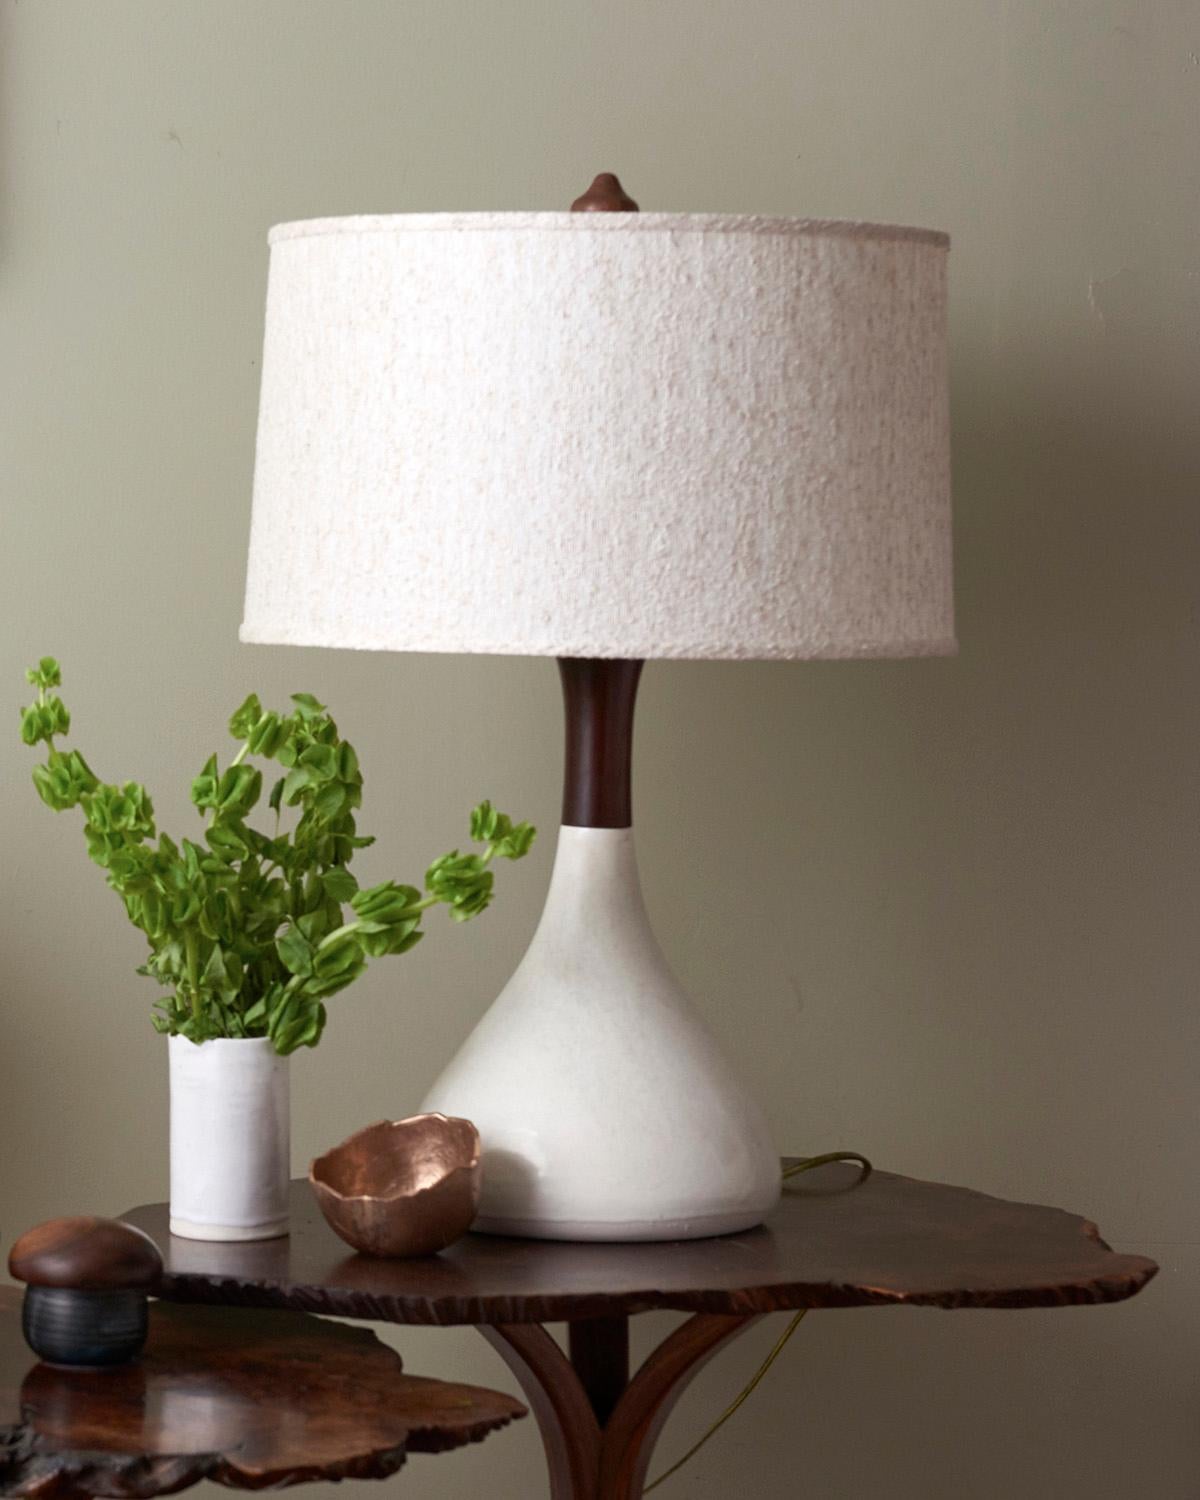 Meet Bella. Inspired by Mid-Century Modern design, Bella is both curvy and tapered, making her substantial but quite elegant. A hand poured porcelain base is topped with a hand turned walnut neck and finial. Nubbly boucle shade. Nickel hardware,